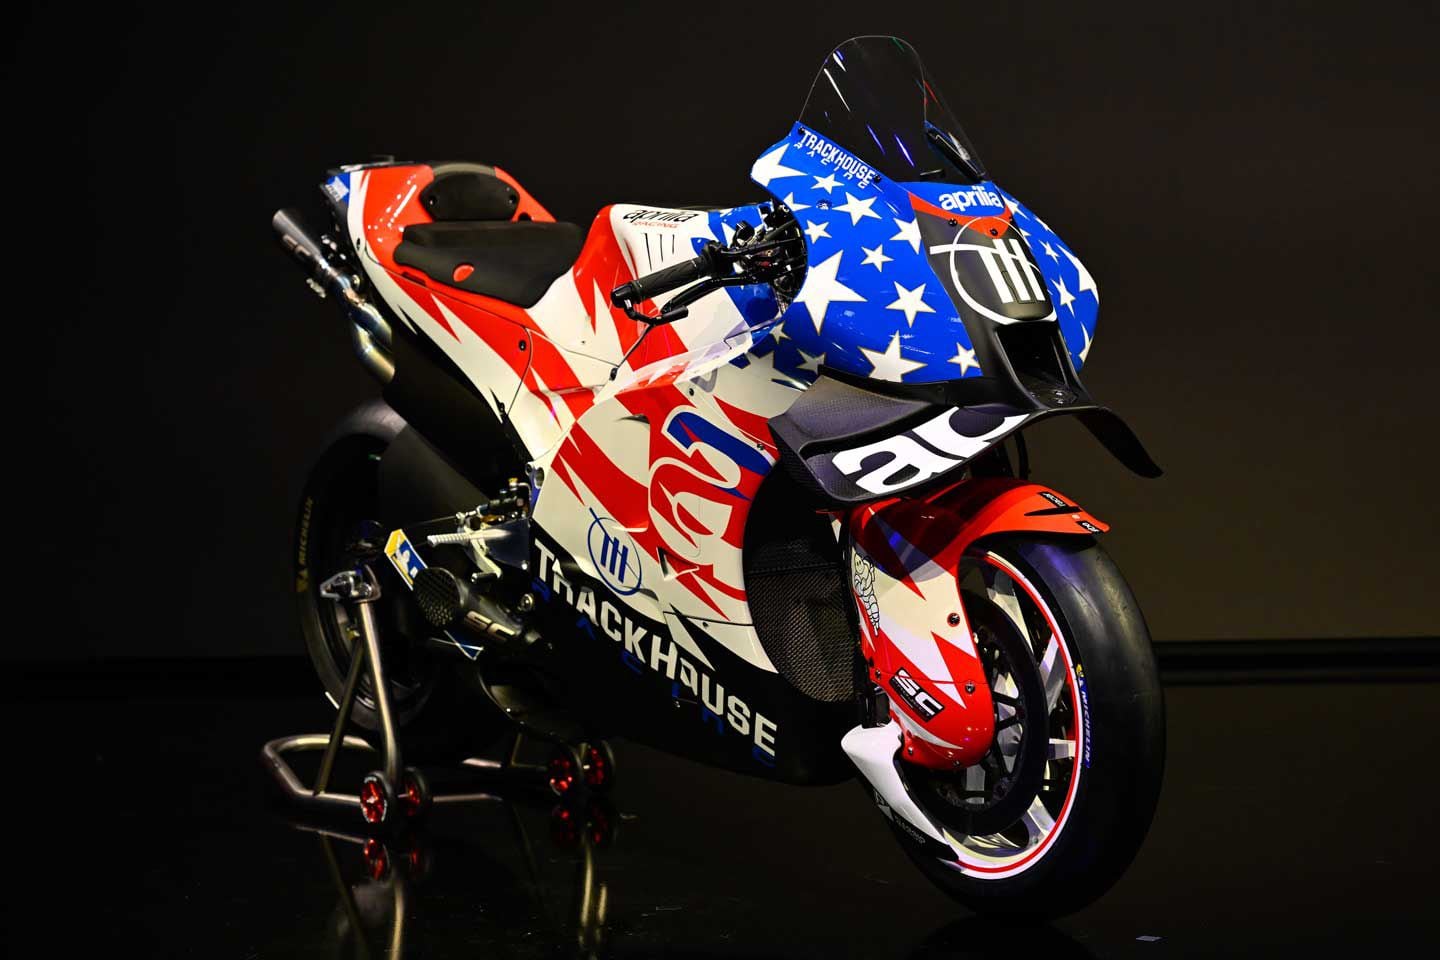 Trackhouse Racing is a major player in NASCAR and now has jumped into MotoGP with a two-rider team on Aprilia’s RS-GP.